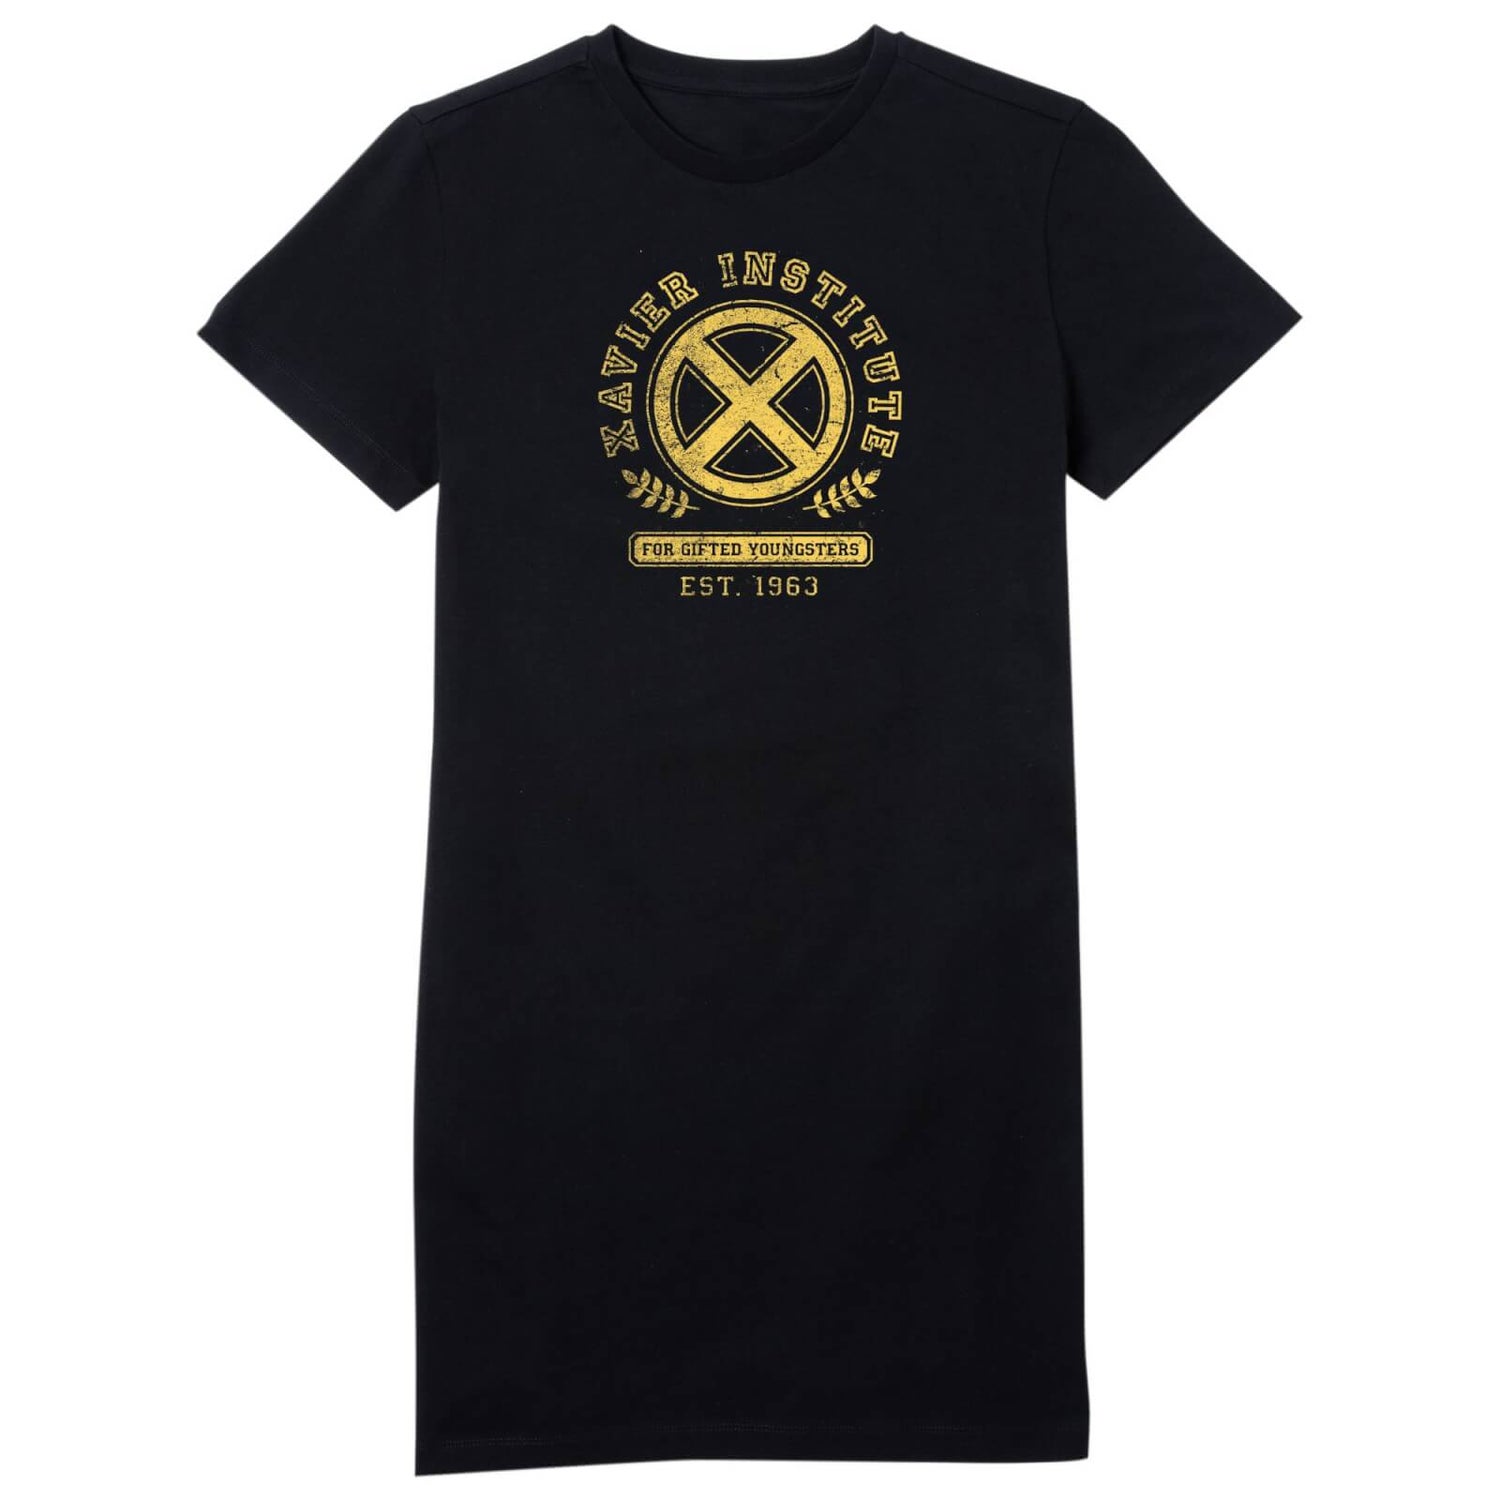 X-Men Xavier Institute For Gifted Youngsters Drk Women's T-Shirt Dress - Black